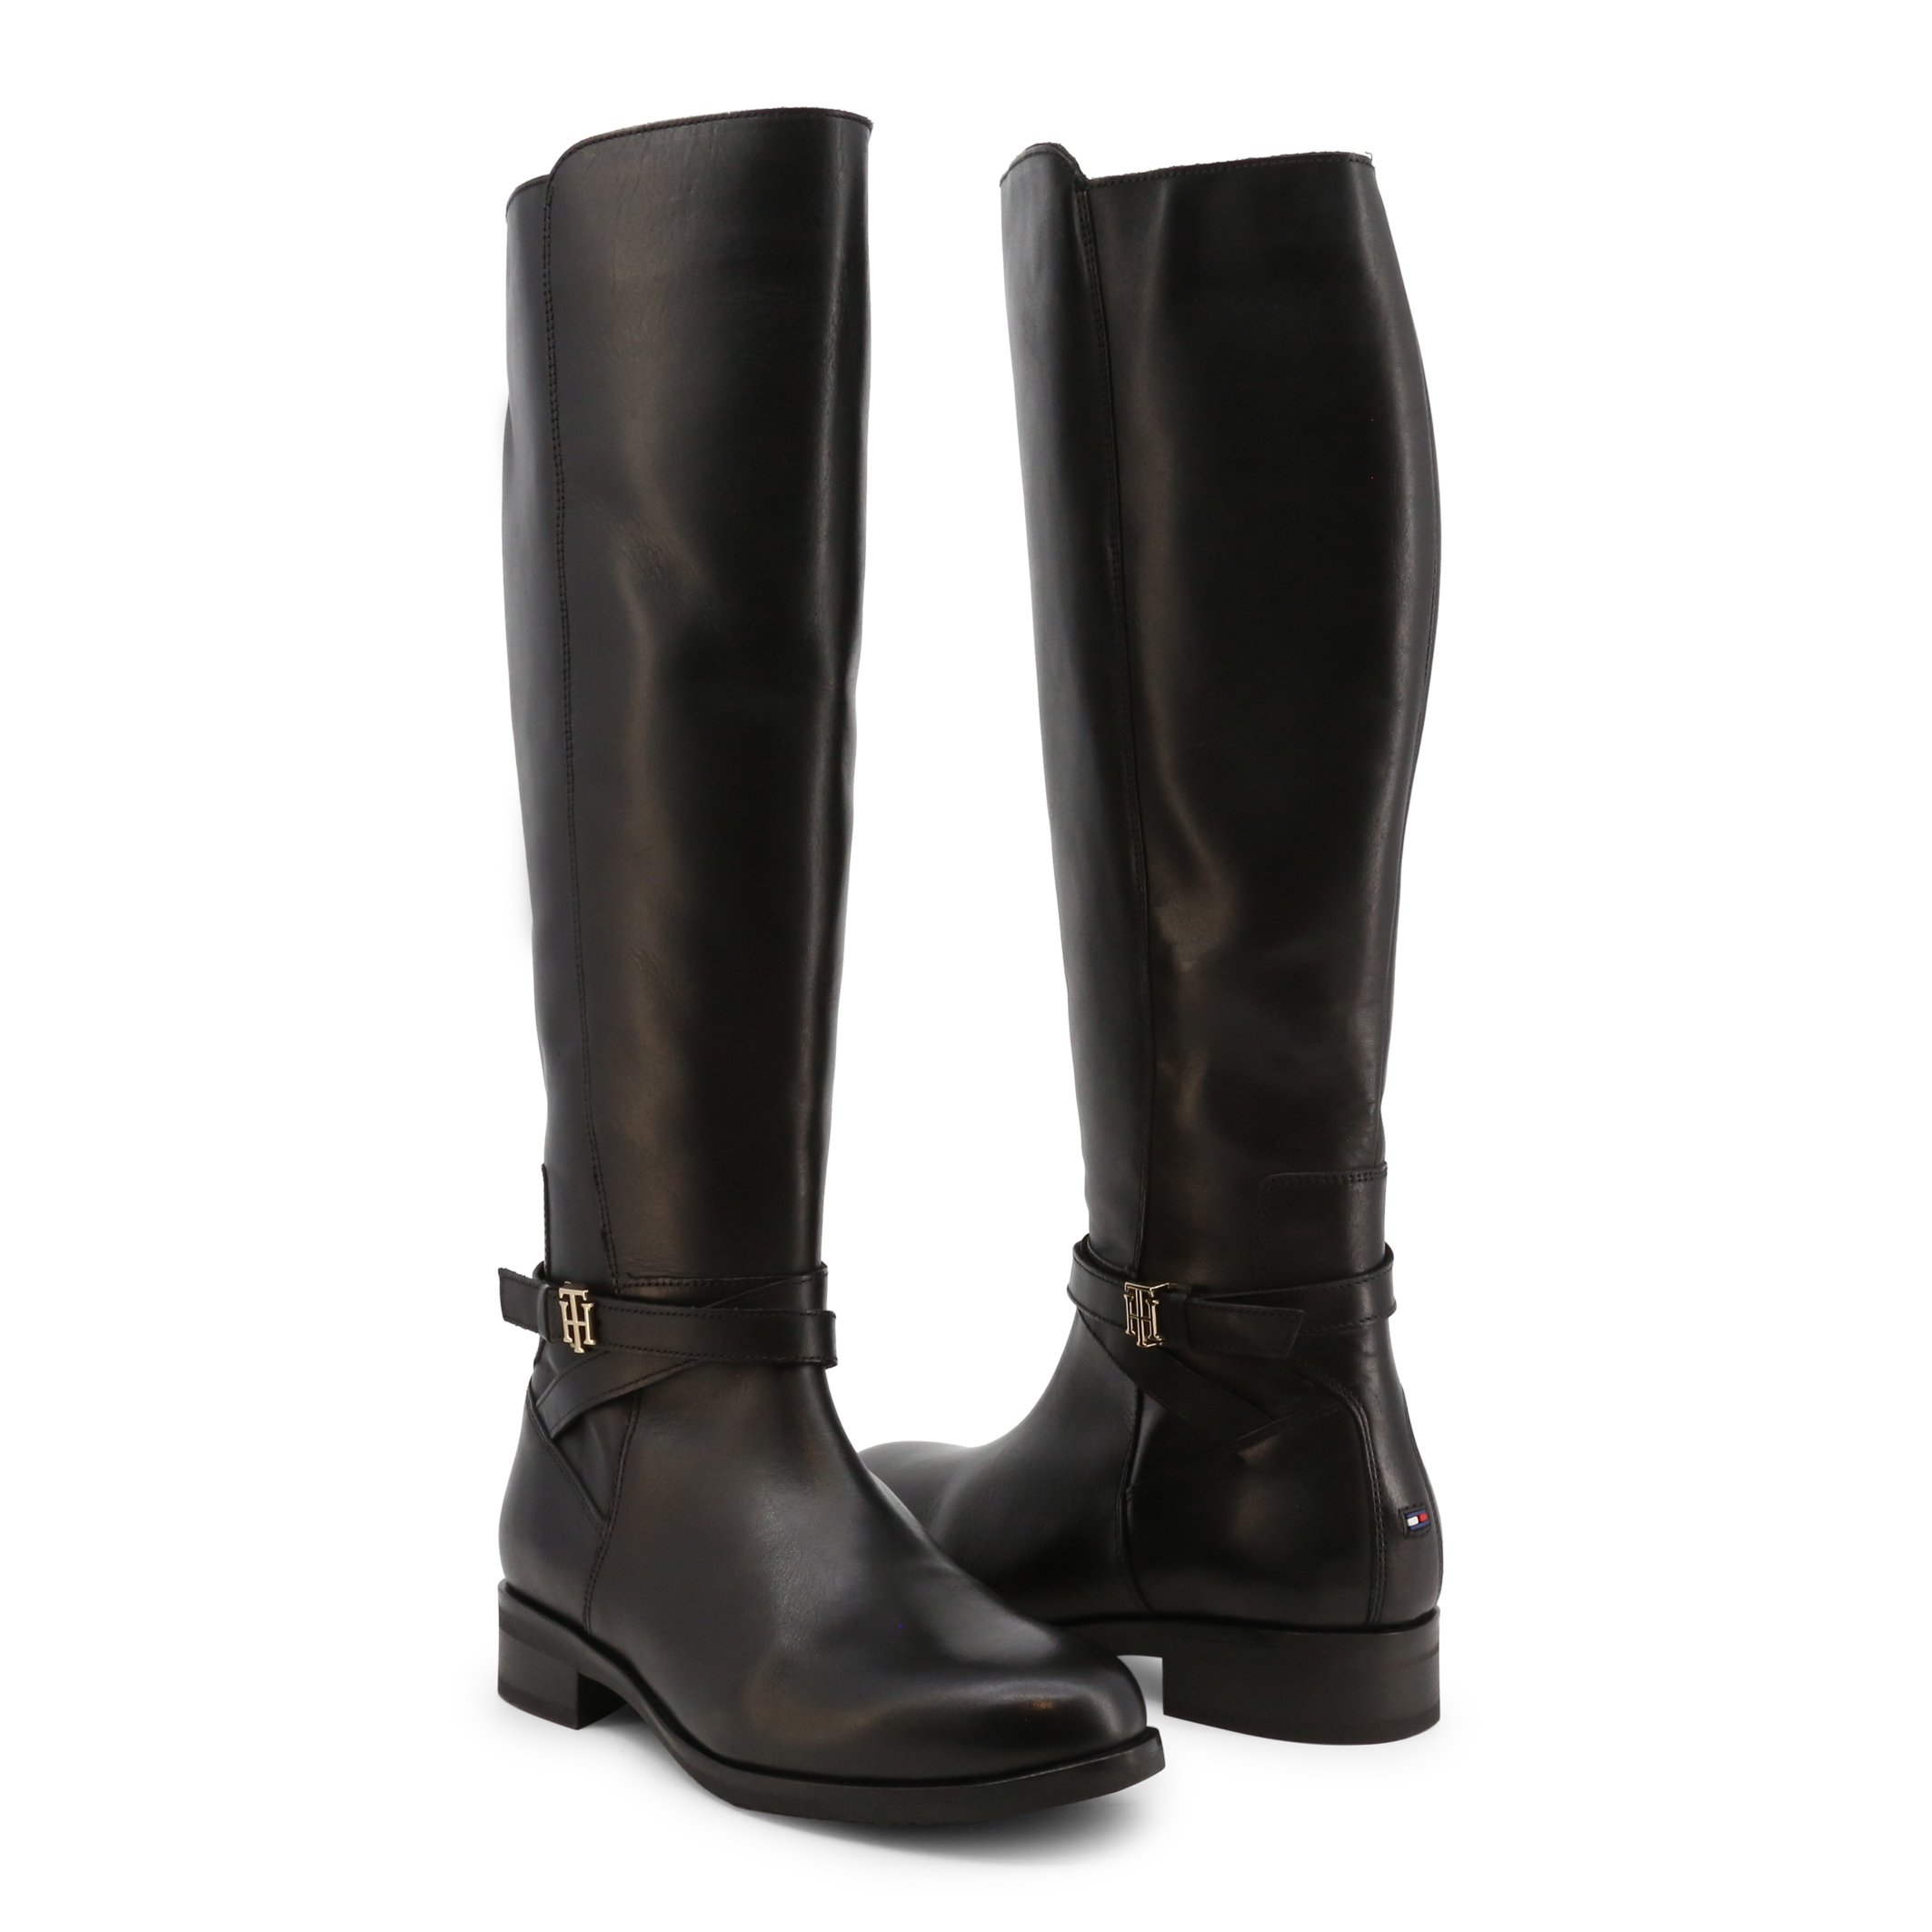 Tommy Hilfiger Black Boots for Women - FW0FW05963